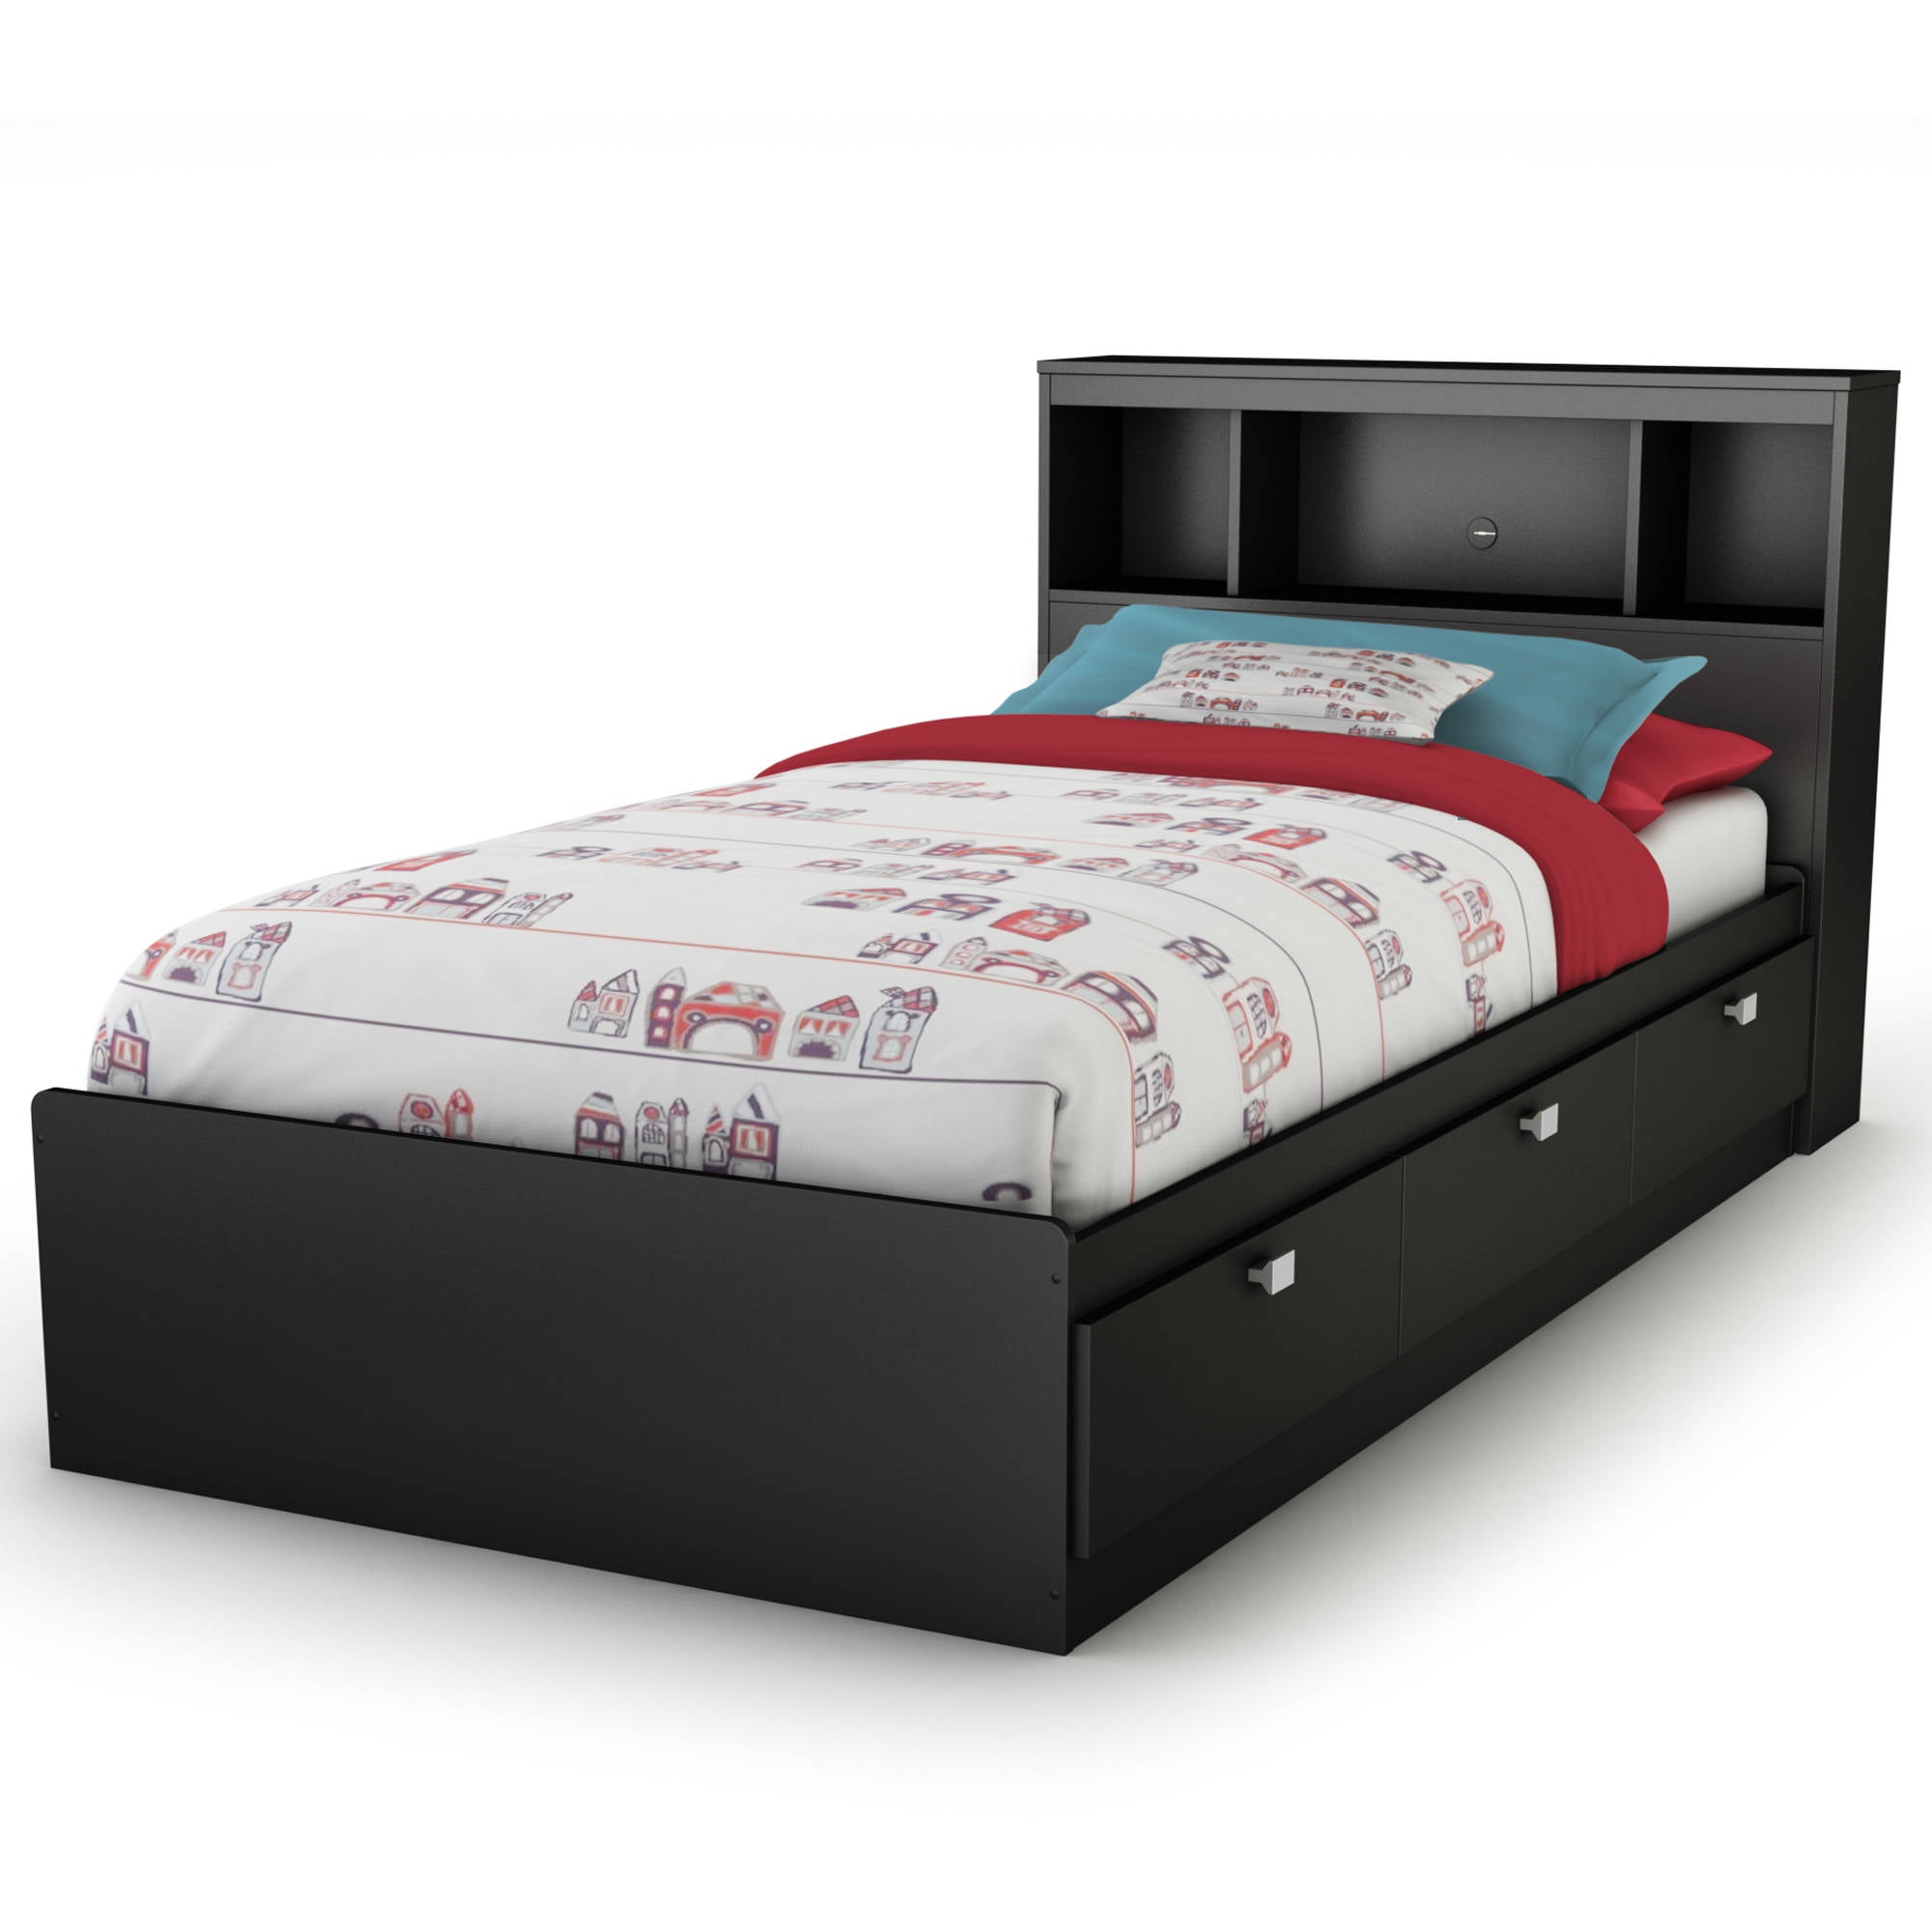 South S Spark 3 Drawer Storage Bed, Twin Xl Platform Bed With Bookcase Headboard 3 Storage Drawers